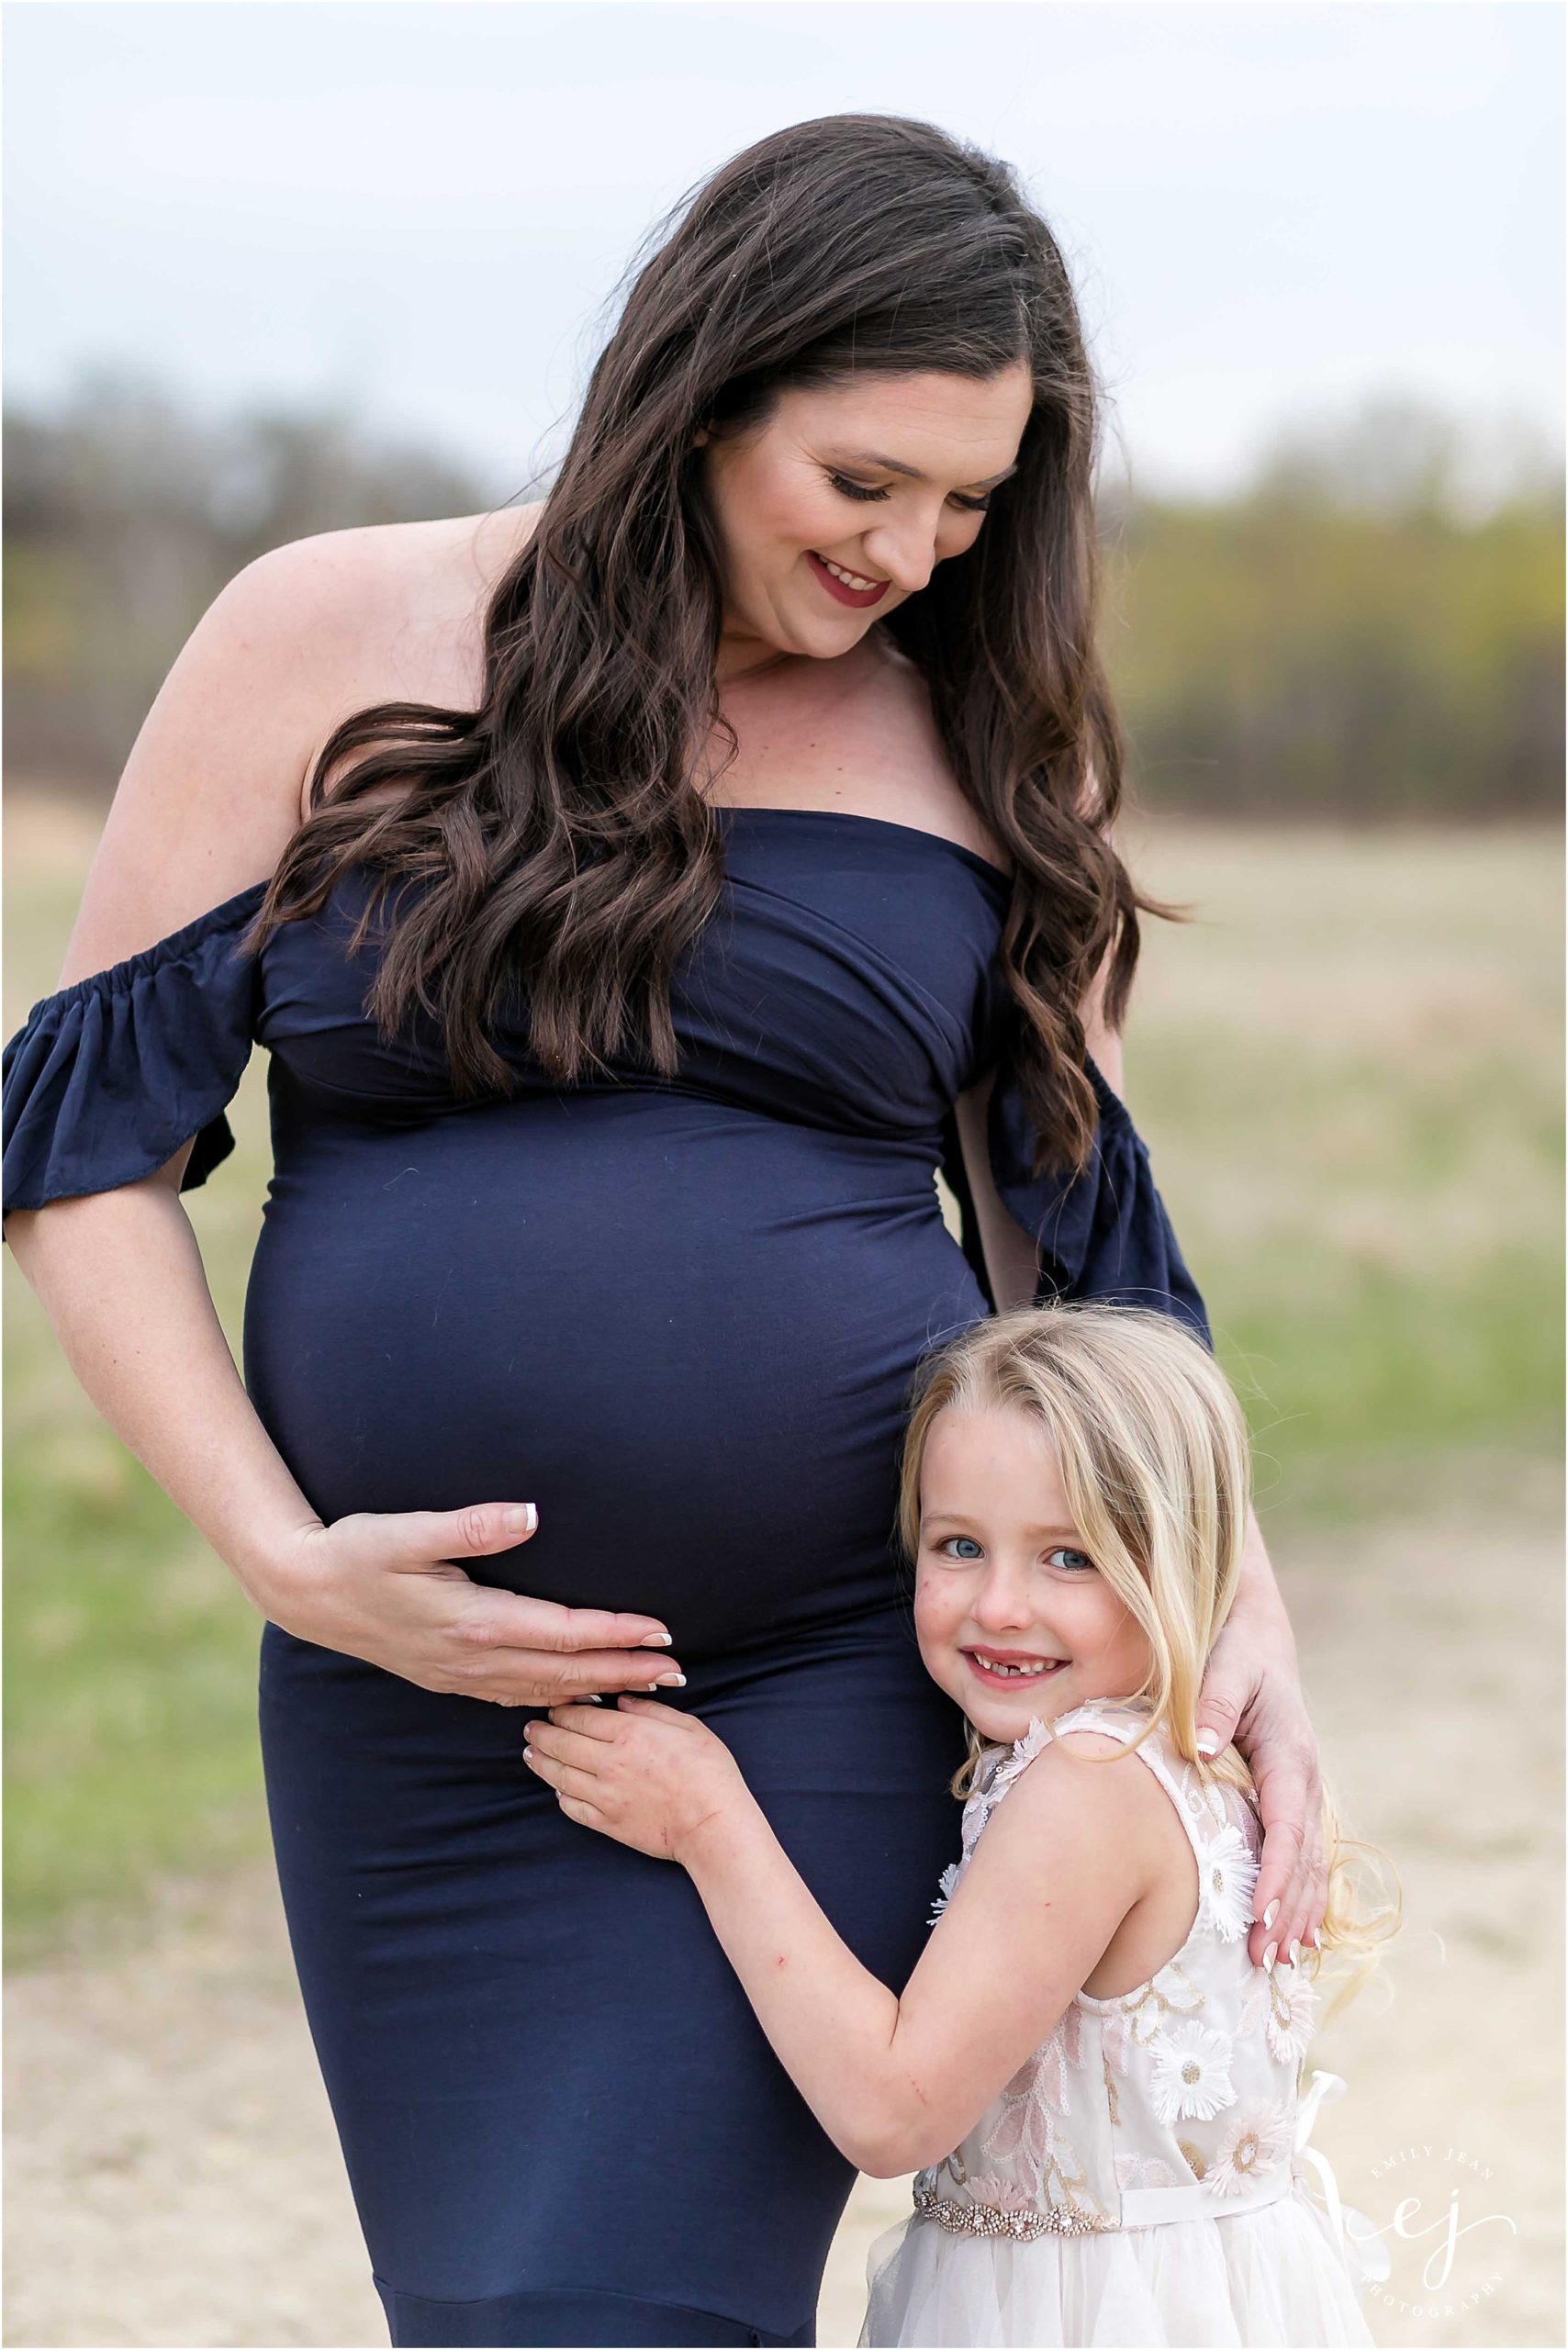 Maternity session mom with her little blonde daughter hugging her leg